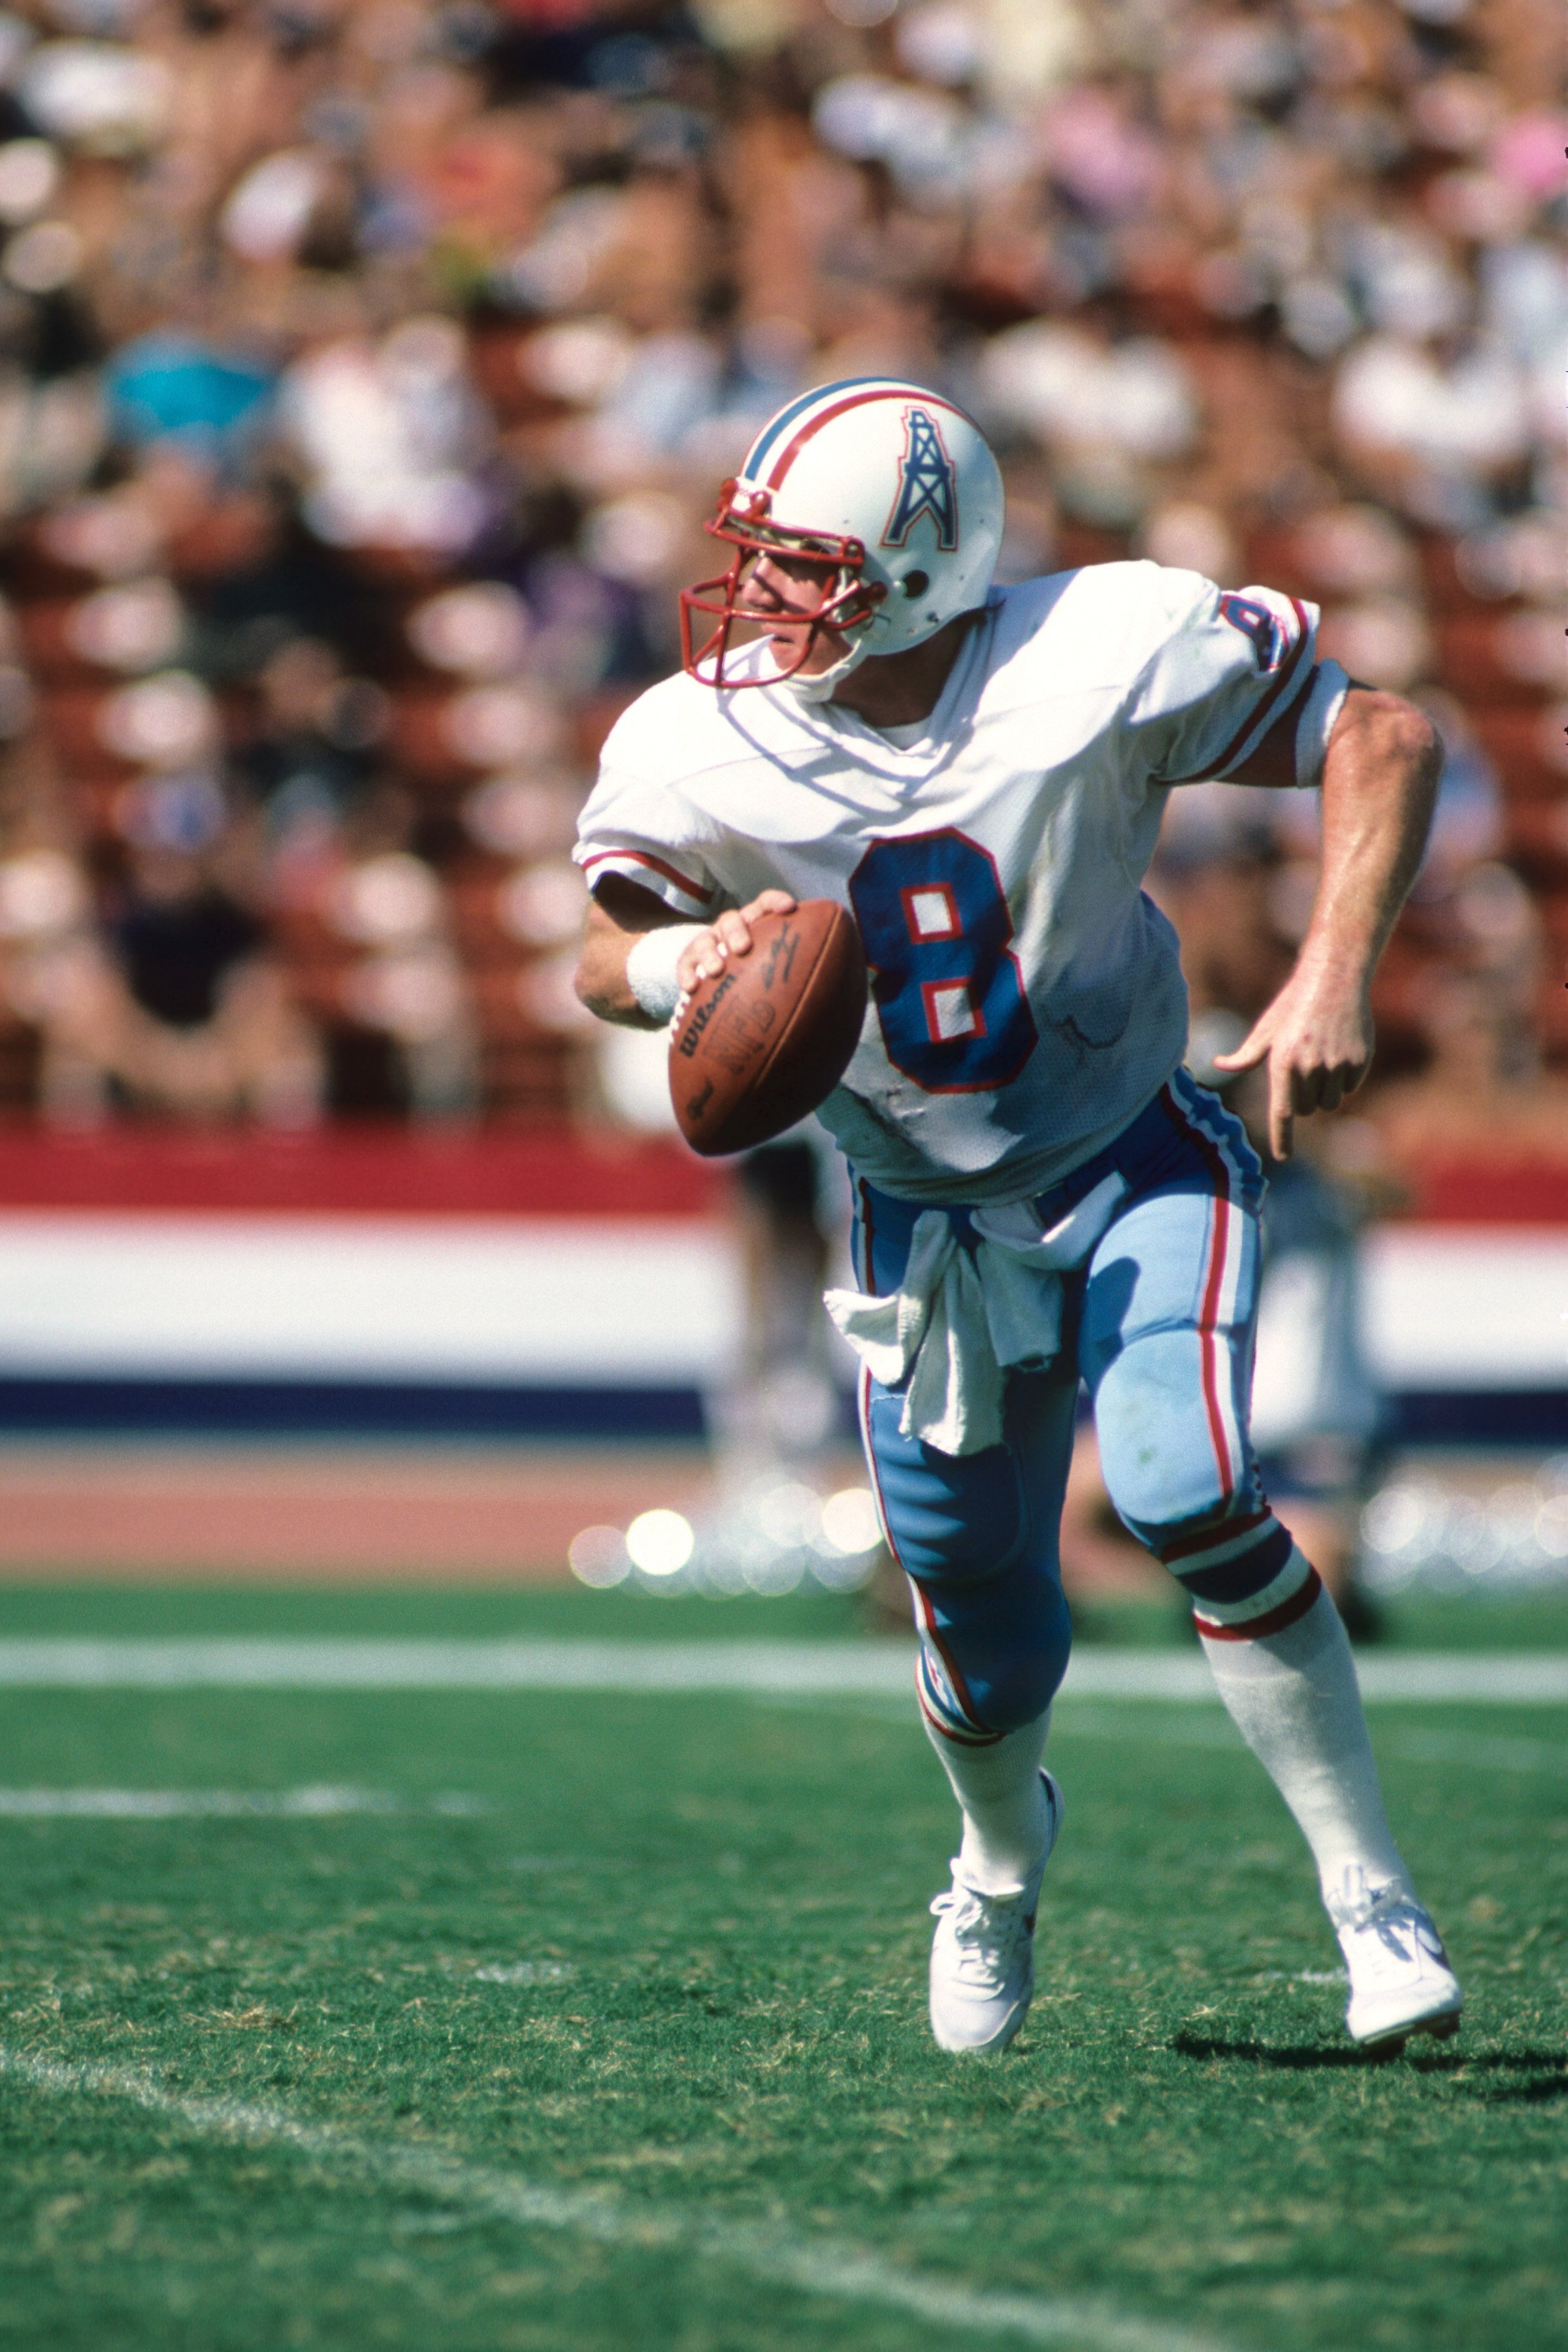 LOS ANGELES - NOVEMBER 11:  Quaterback Archie Manning #8 of the Houston Oilers rolls out to pass during the game against the Los Angeles Raiders at the Los Angeles Memorial Coliseum on November 11, 1983 in Los Angeles, California.  The Raiders won 20-6.